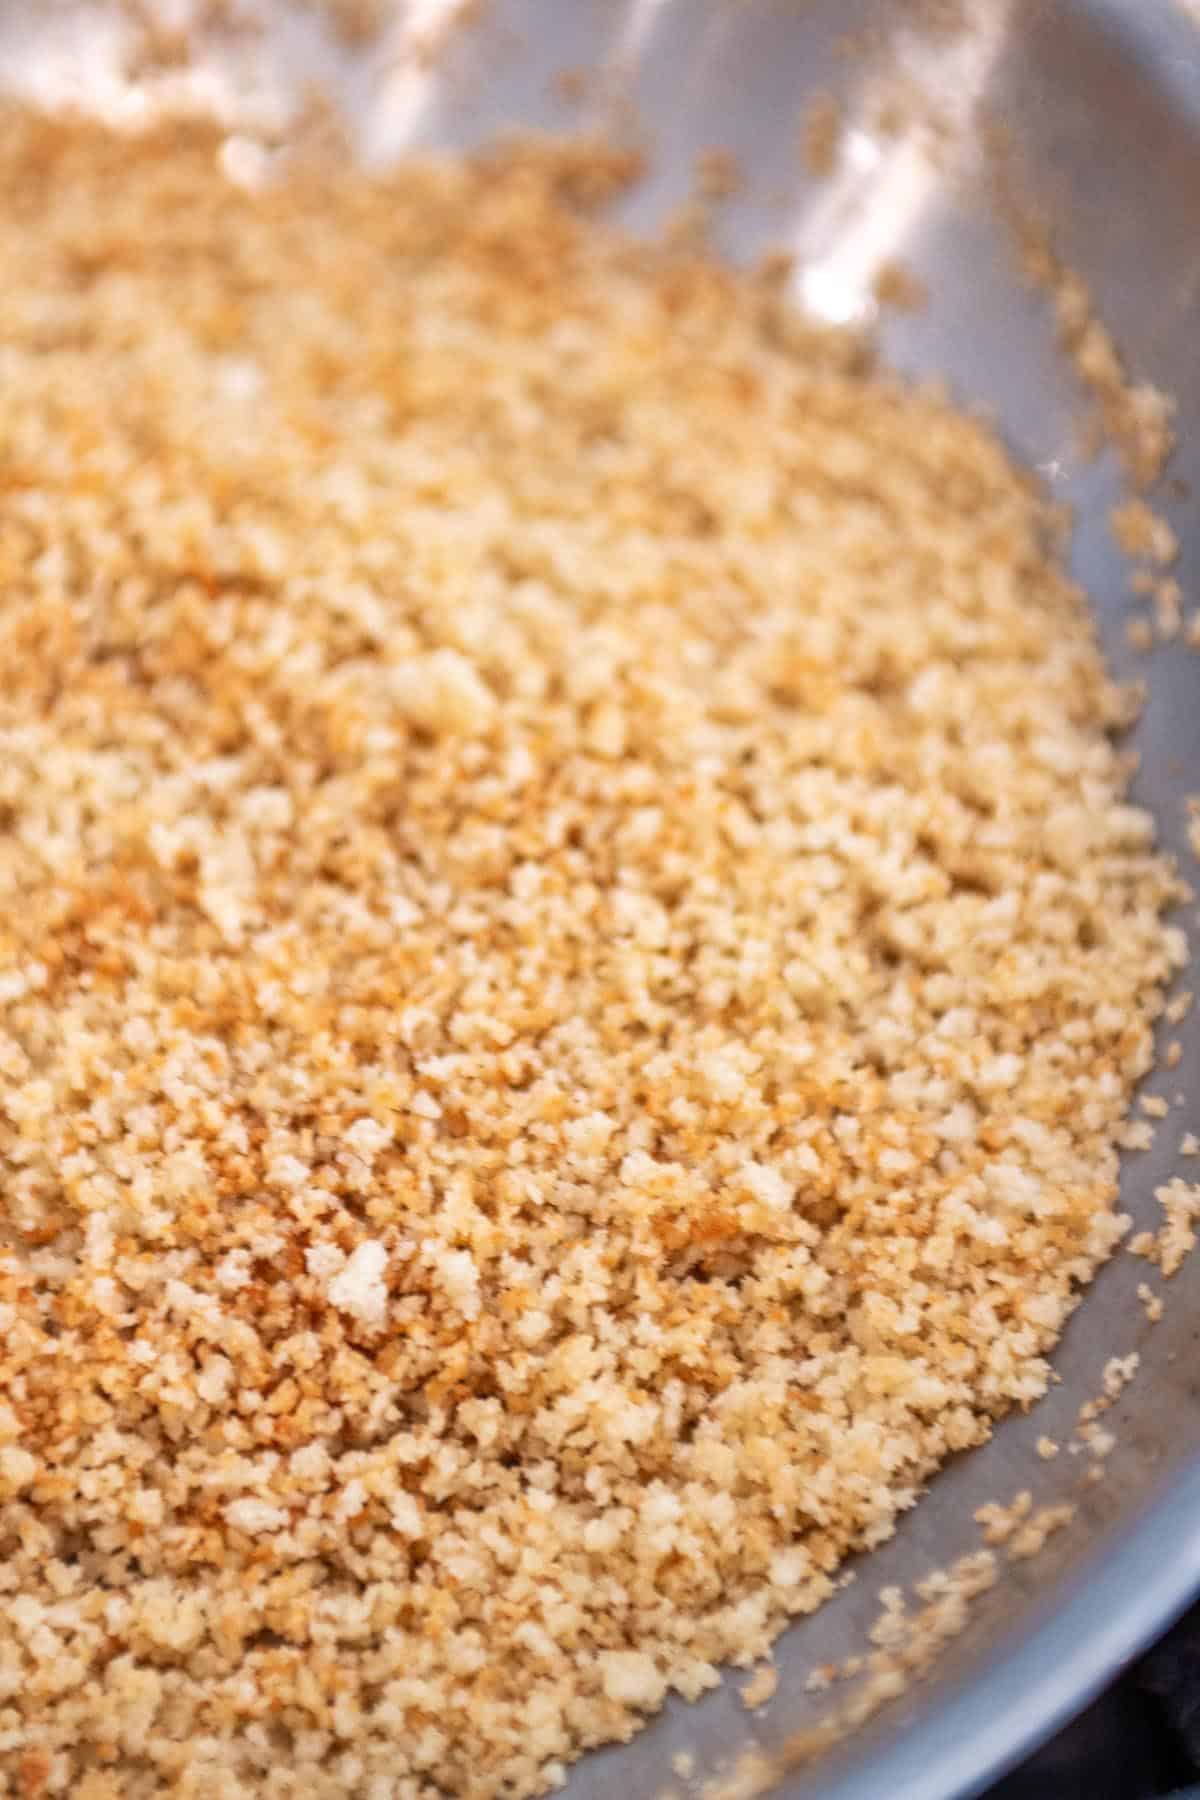 A pan with panko crumbs being toasted.